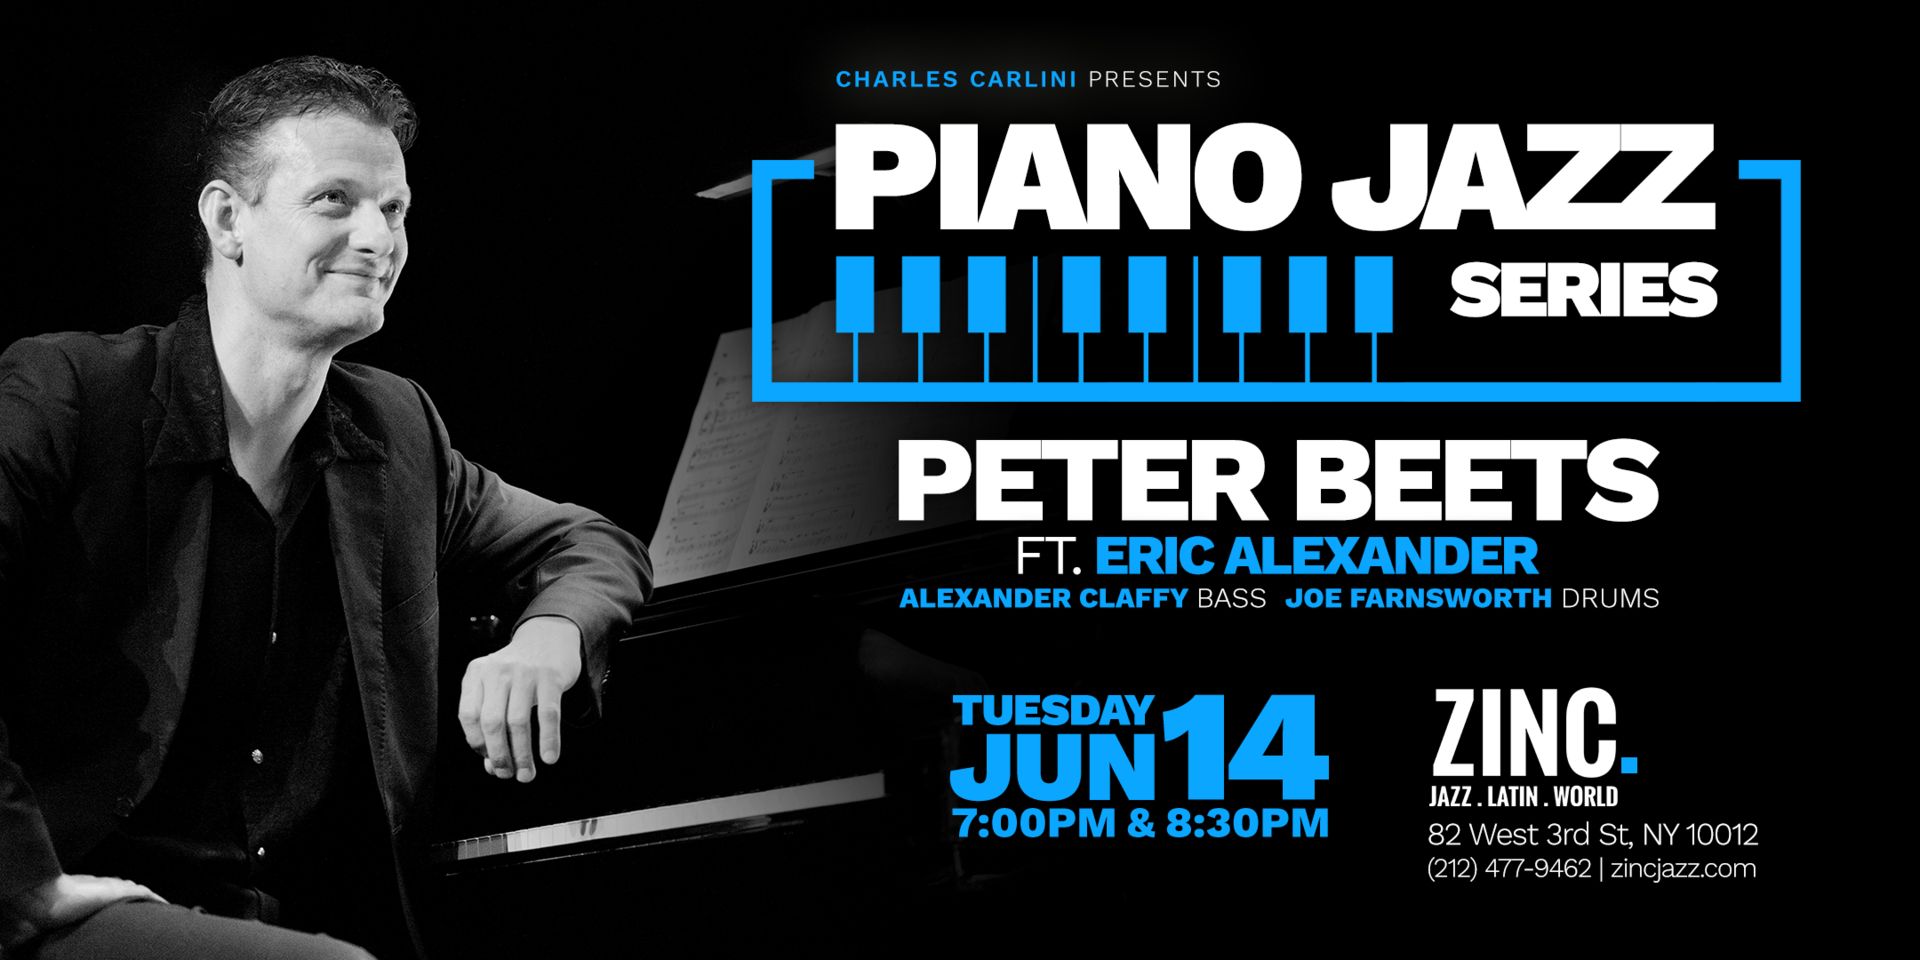 Piano Jazz Series: Peter Beets ft. Eric Alexander, New York, United States